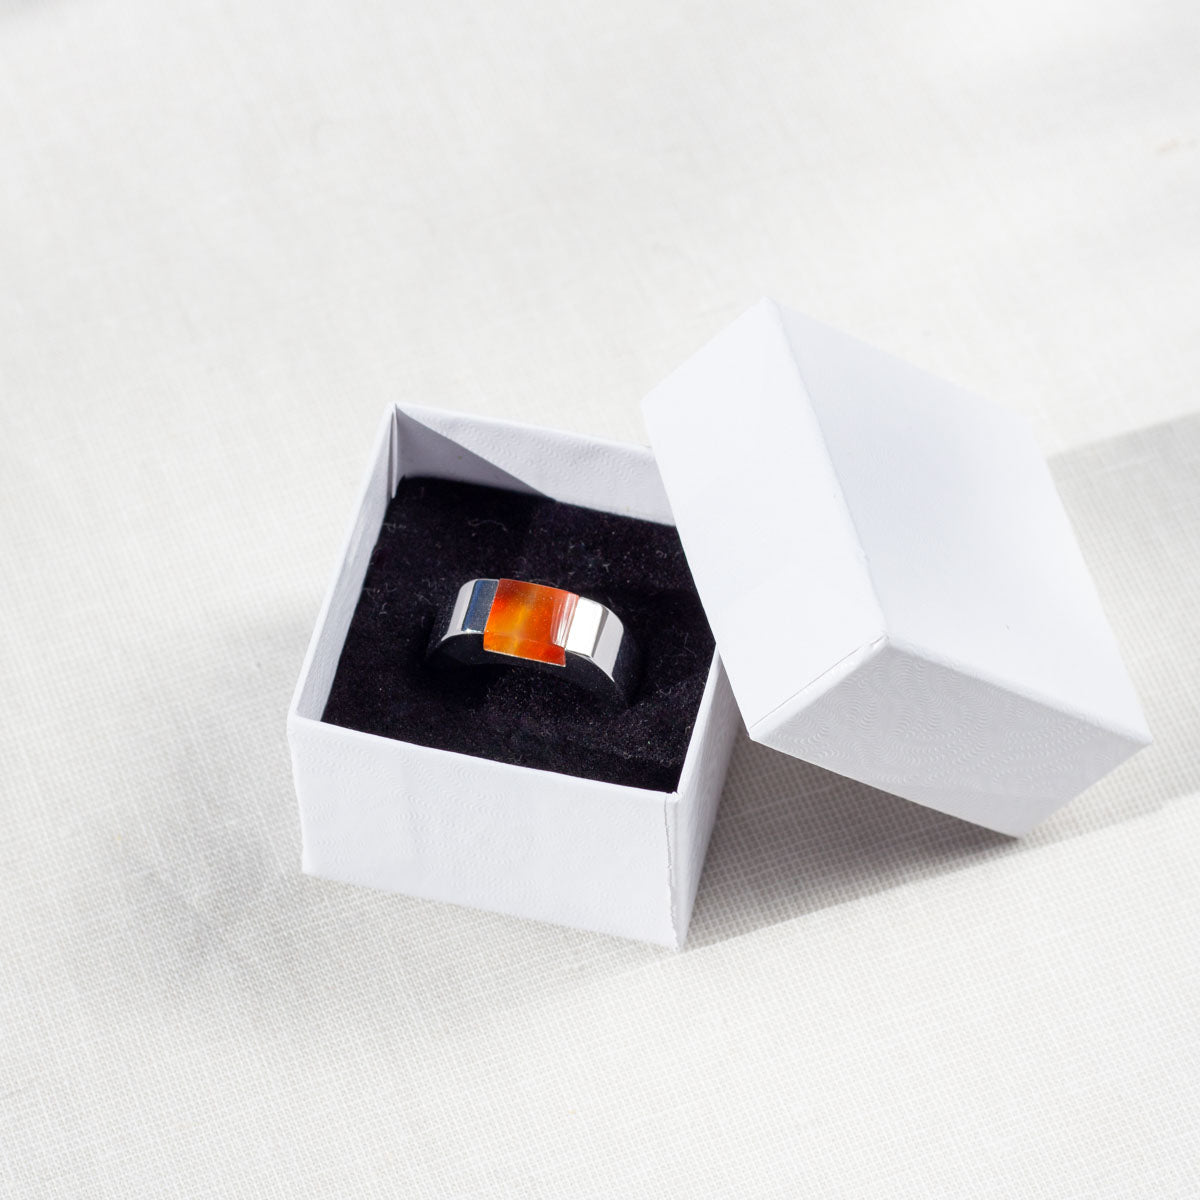 Customizable stone ring with personalized engraving in white gift box